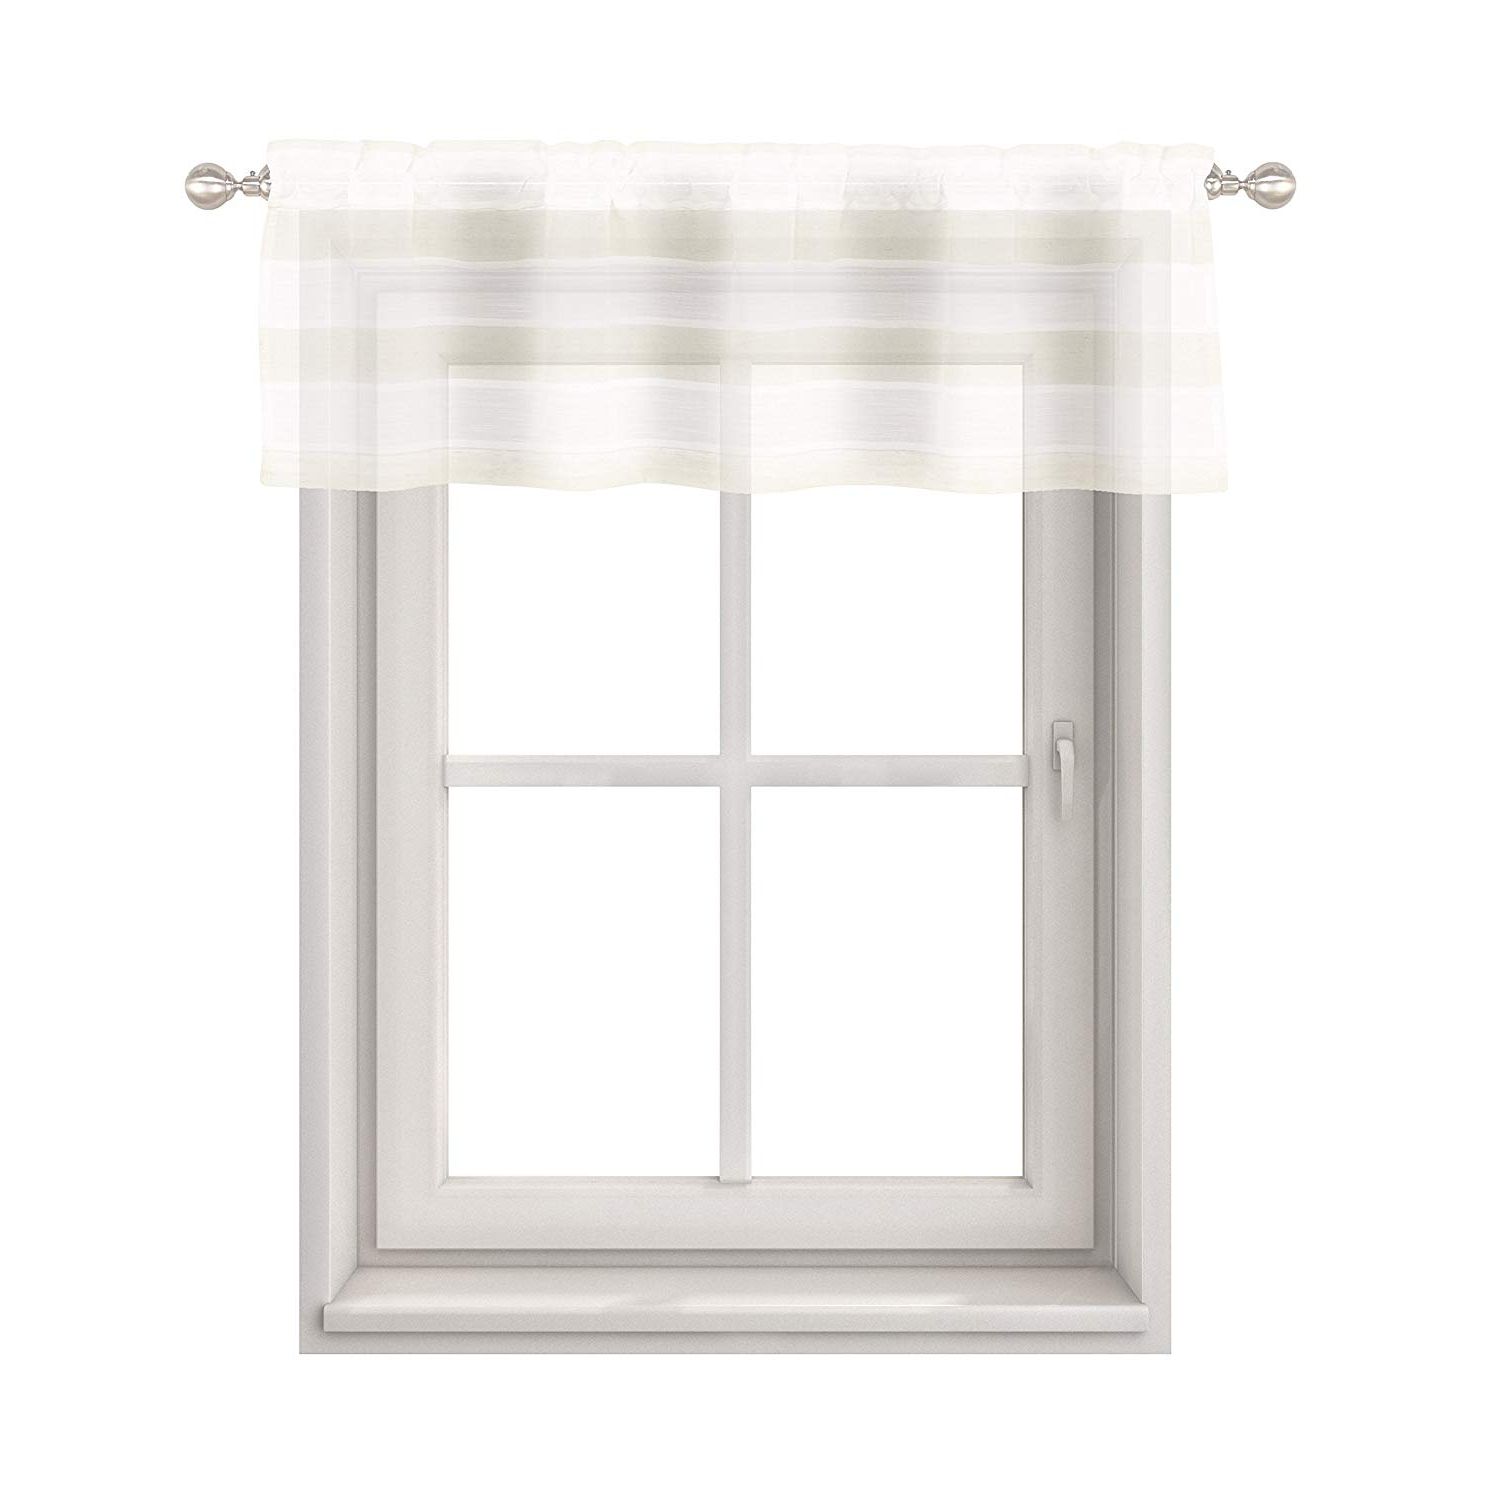 Bathroom And More Dakota Collection 2 Piece Sheer Window Curtain Café/tier  Set: White And Linen/beige Stripe Design (pair (2) Tiers 36in L Each) Inside Recent Dakota Window Curtain Tier Pair And Valance Sets (View 18 of 20)